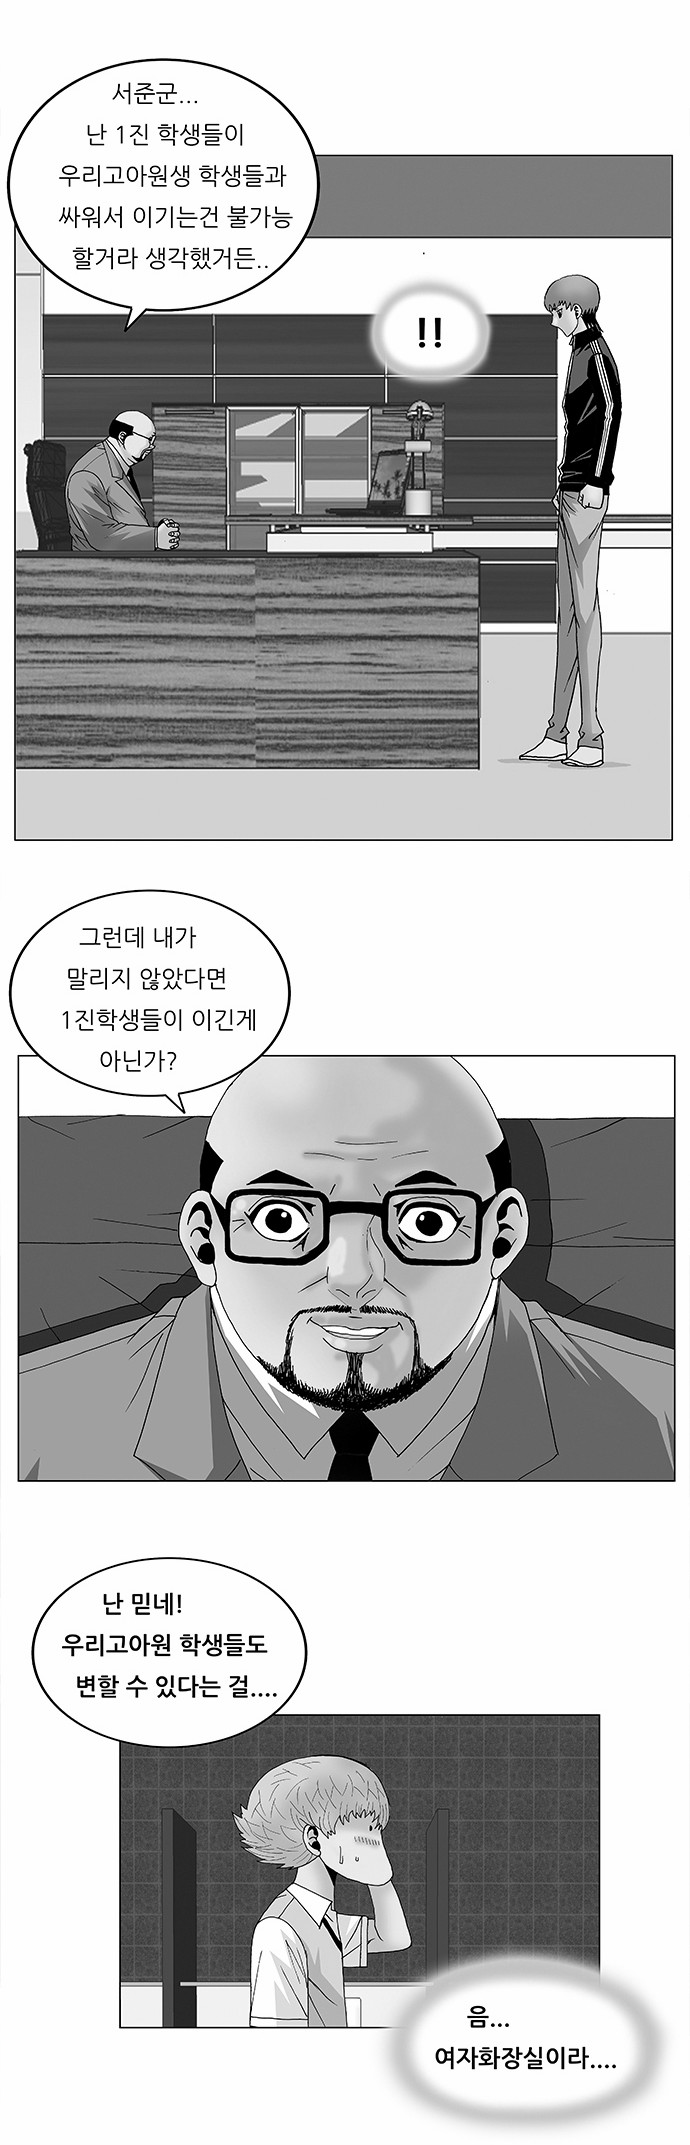 Ultimate Legend - Kang Hae Hyo - Chapter 98 - Page 2